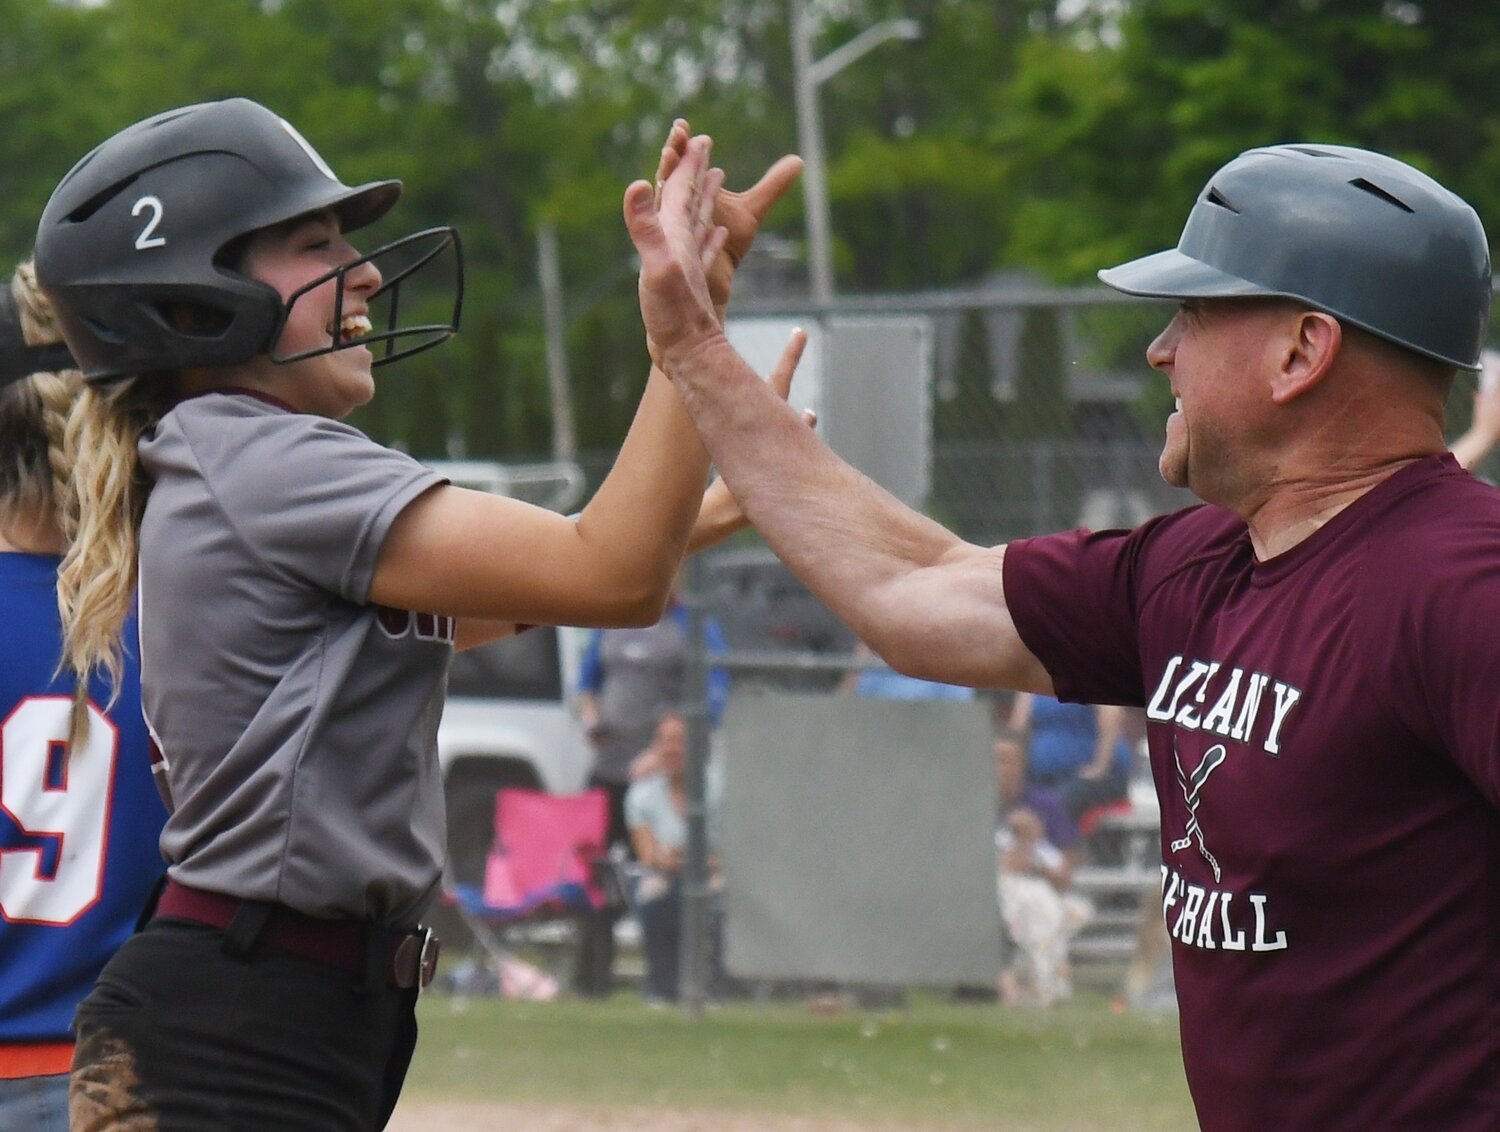 Juliet Tagaliaferri celebrates a walkoff triple to give Oriskany a 3-2 win over Poland on Friday. The win helped give Poland the Center State Conference Division III title.